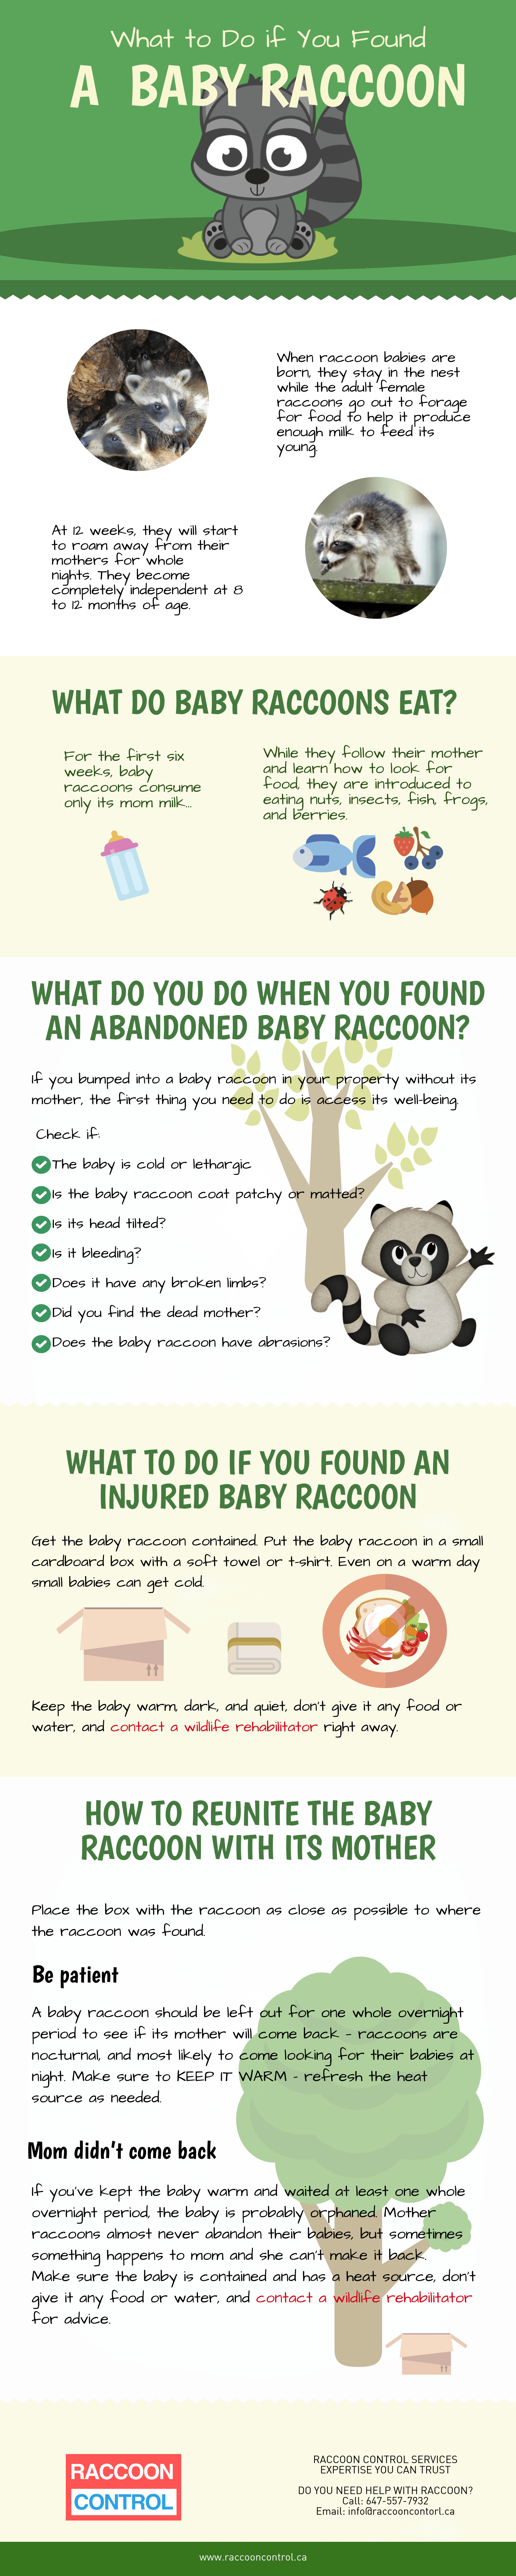 what-to-do-if-you-found-a-baby-raccoon-infographic